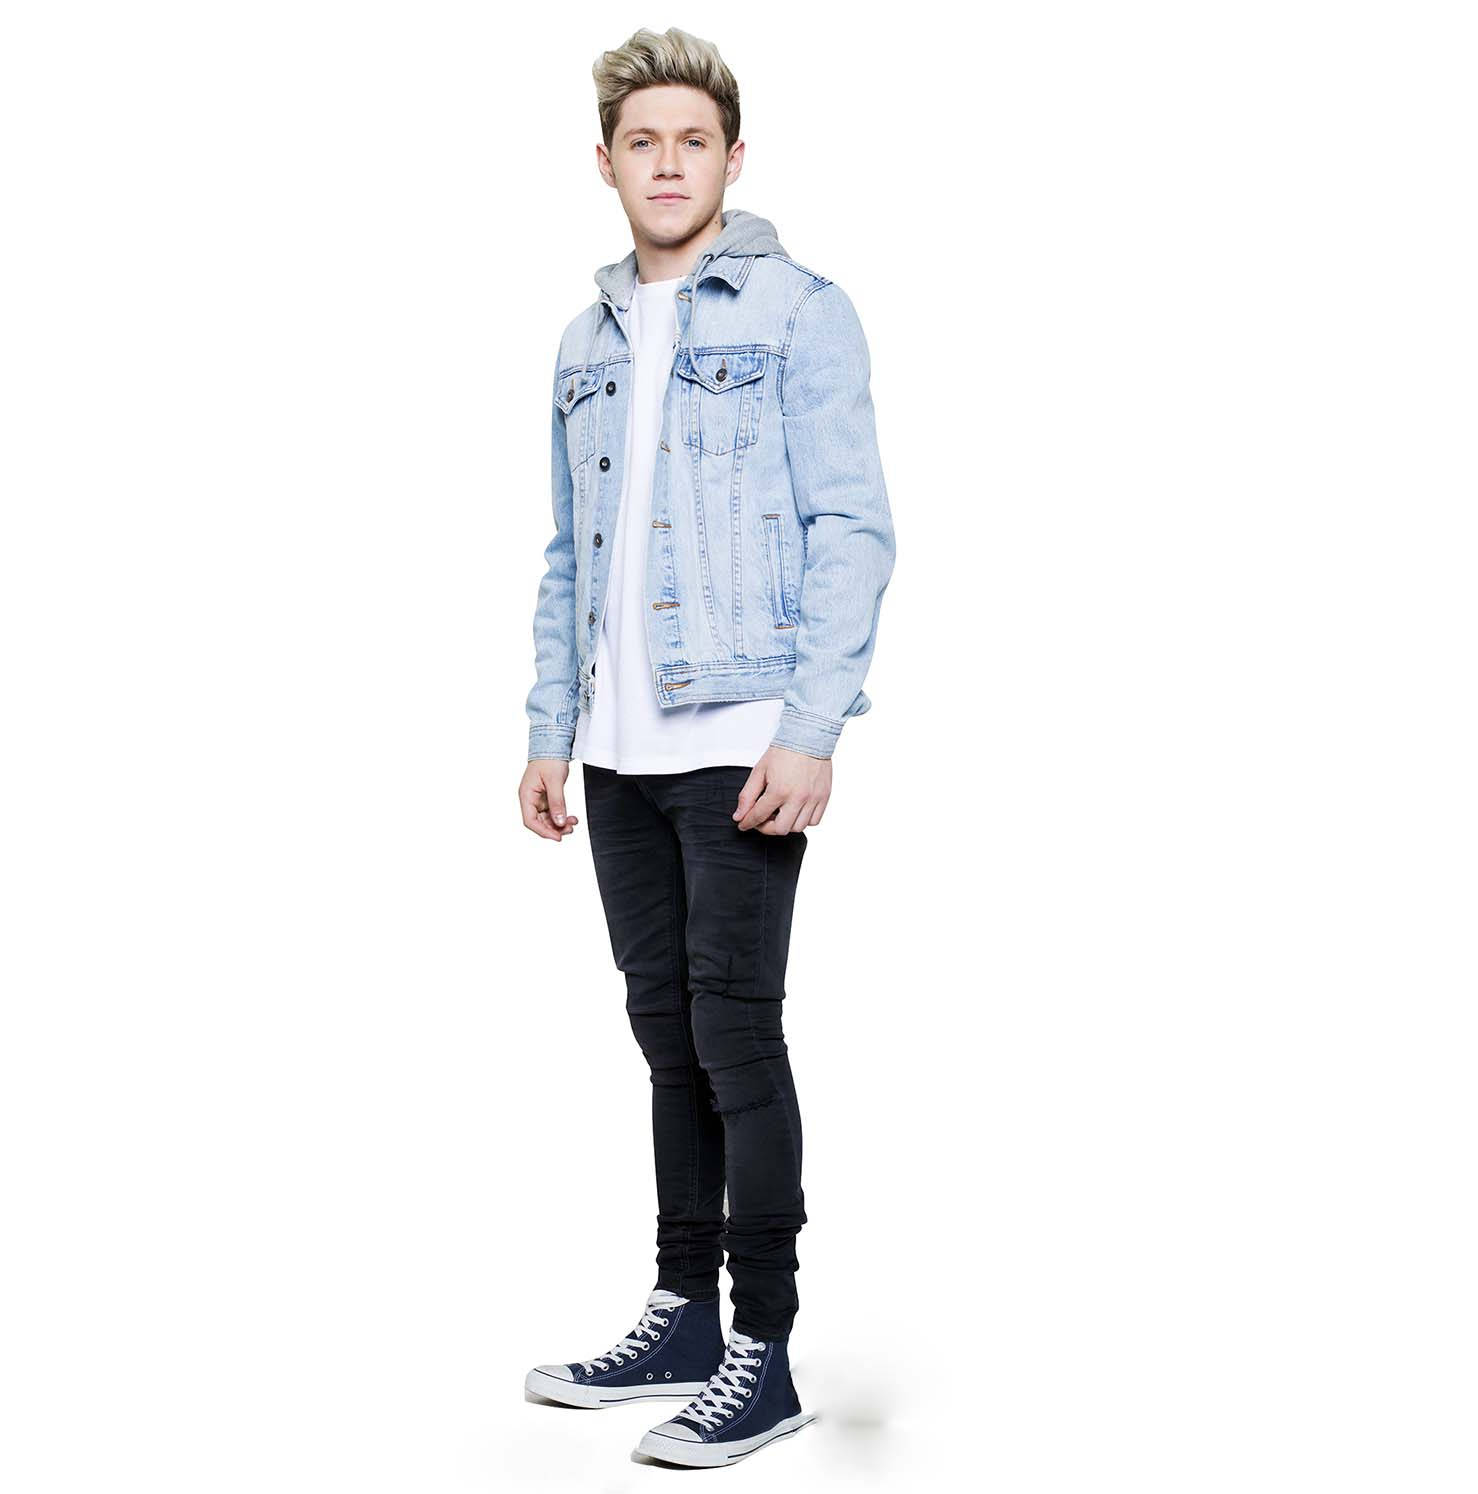 Top 999+ Niall Horan Wallpapers Full HD, 4K✅Free to Use